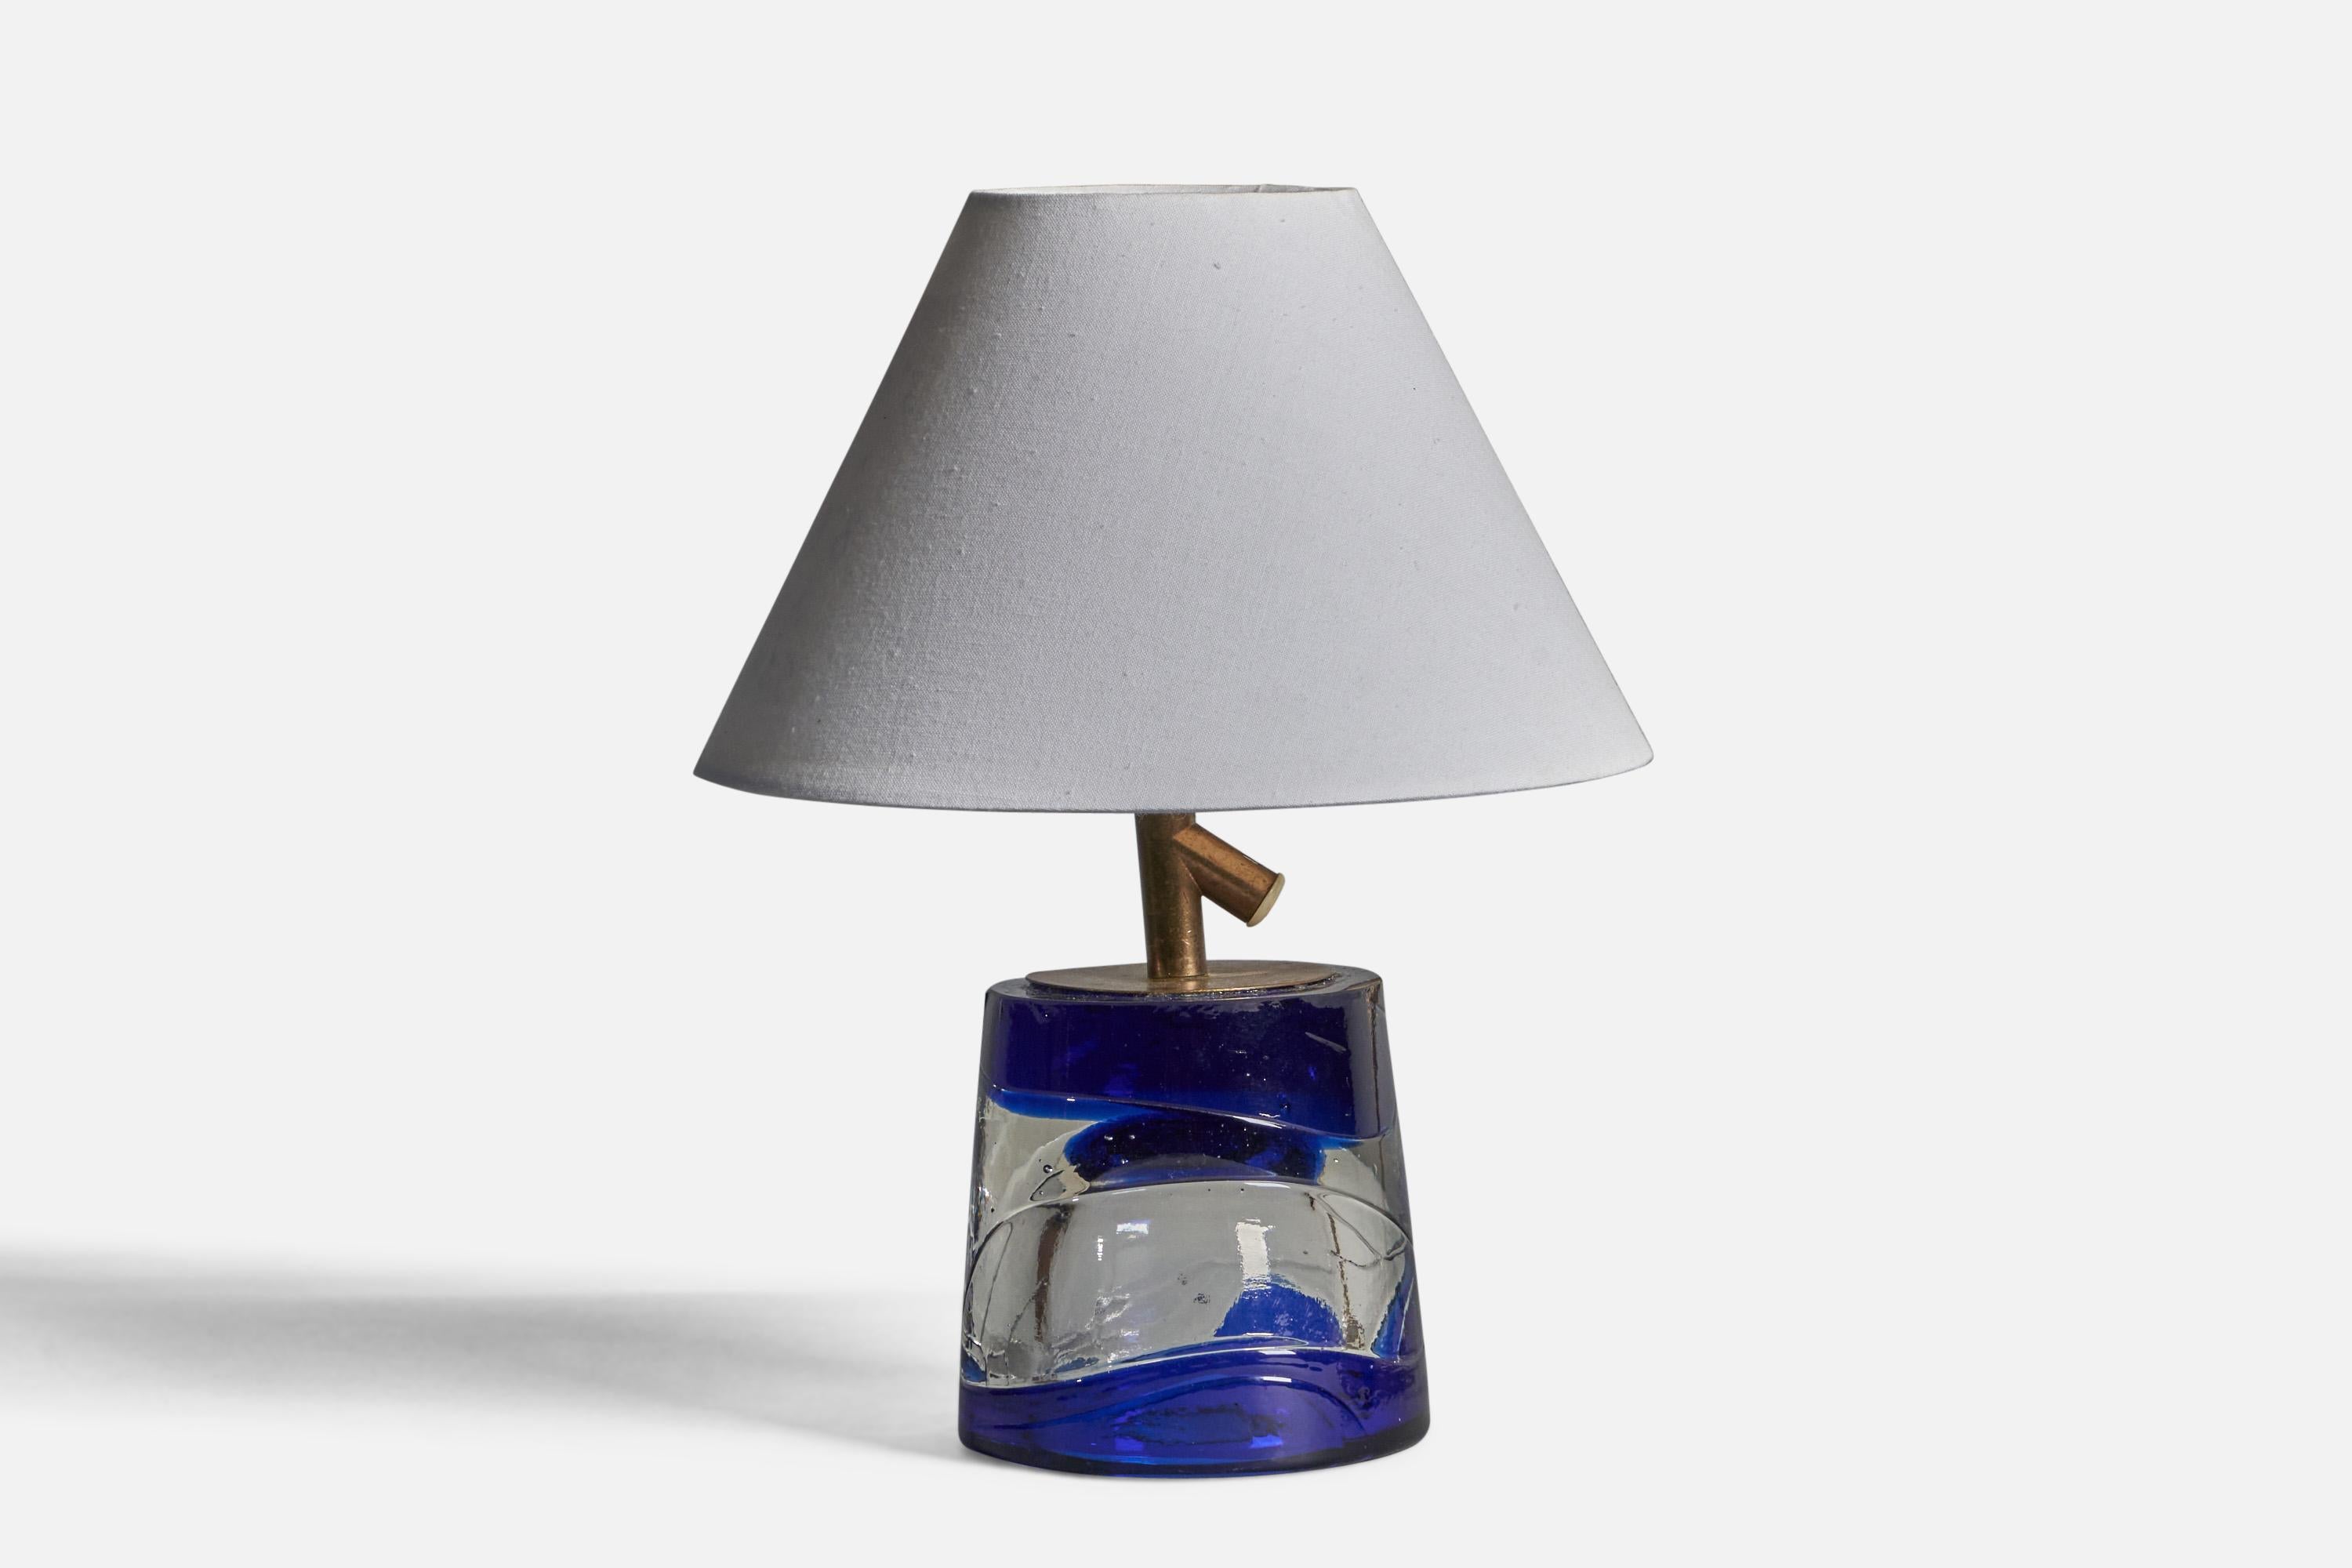 A blue and translucent glass and brass table lamp, designed and produced in by Reijmyre, Sweden, 1960s.

Dimensions of Lamp (inches): 7.5